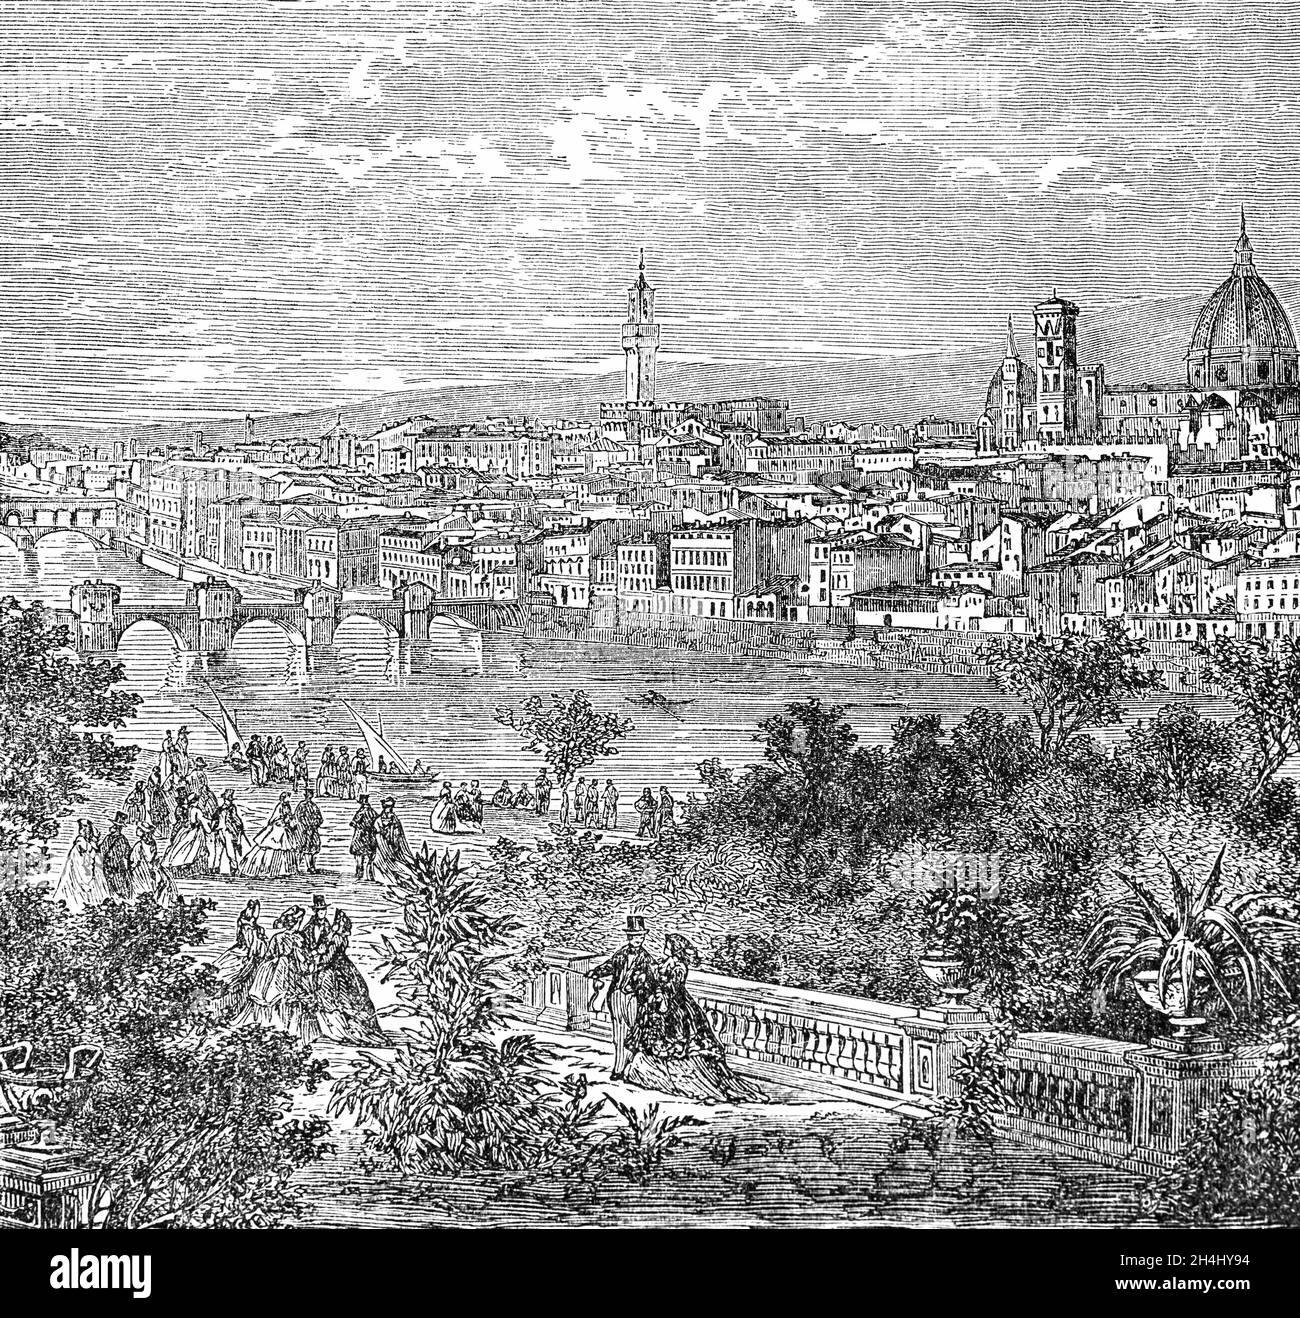 A late 19th Century illustration of Florence, a city in Central-Northern Italy and the capital city of the Tuscany region on the River Arno. Florence was a centre of medieval European trade and finance and one of the wealthiest cities of the era was considered by many academics to have been the birthplace of the Renaissance. Its turbulent political history includes periods of rule by the powerful Medici family and numerous religious and republican revolutions. Stock Photo